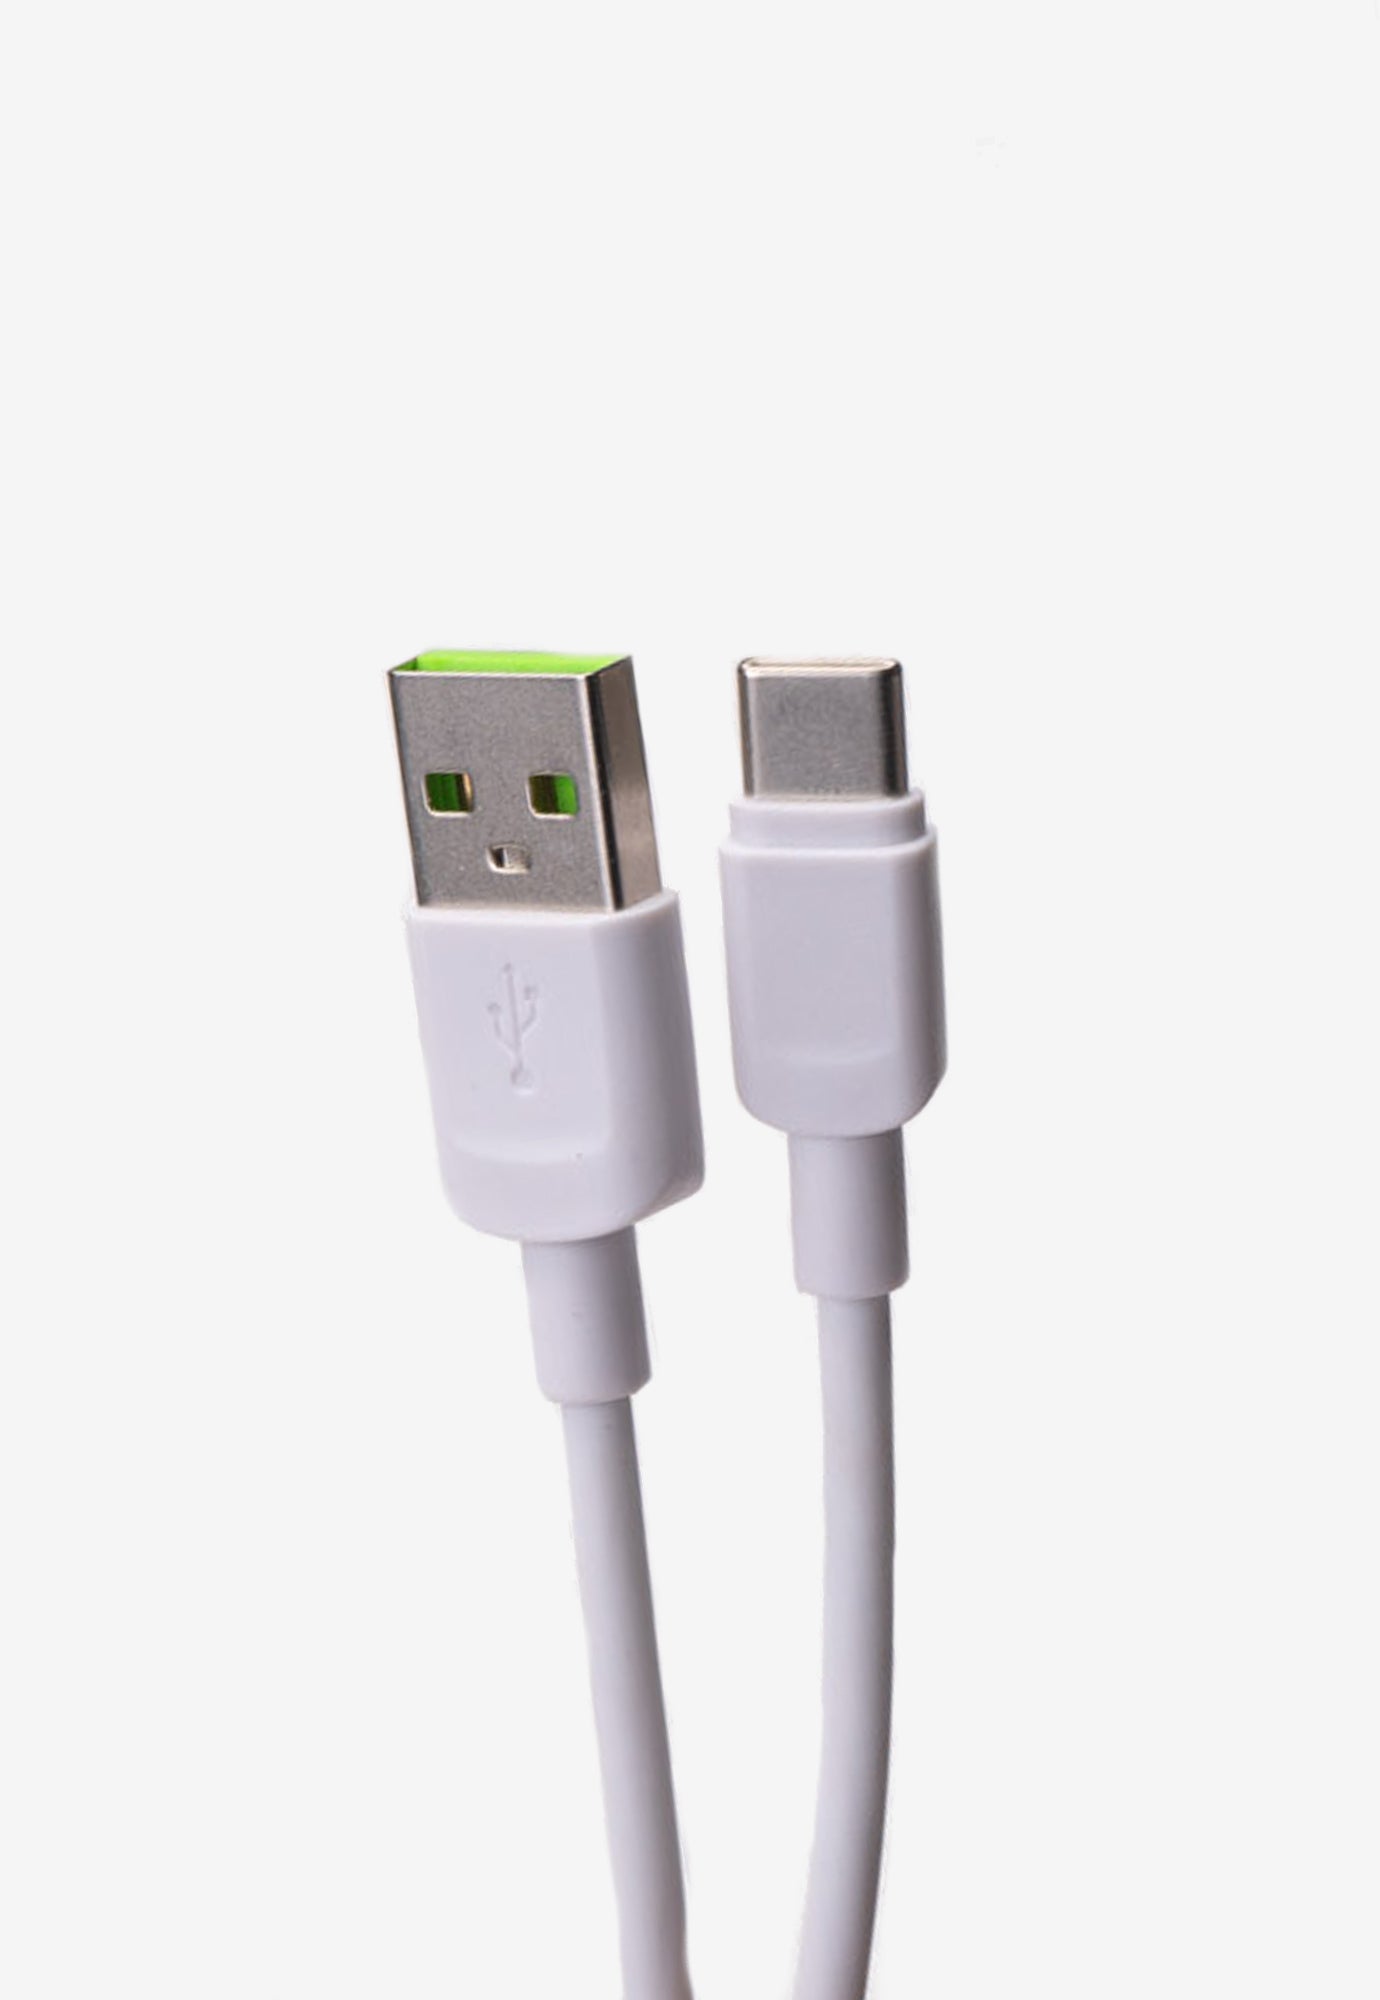 Cable 3 metros para Micro USB Chinitown Chinitown